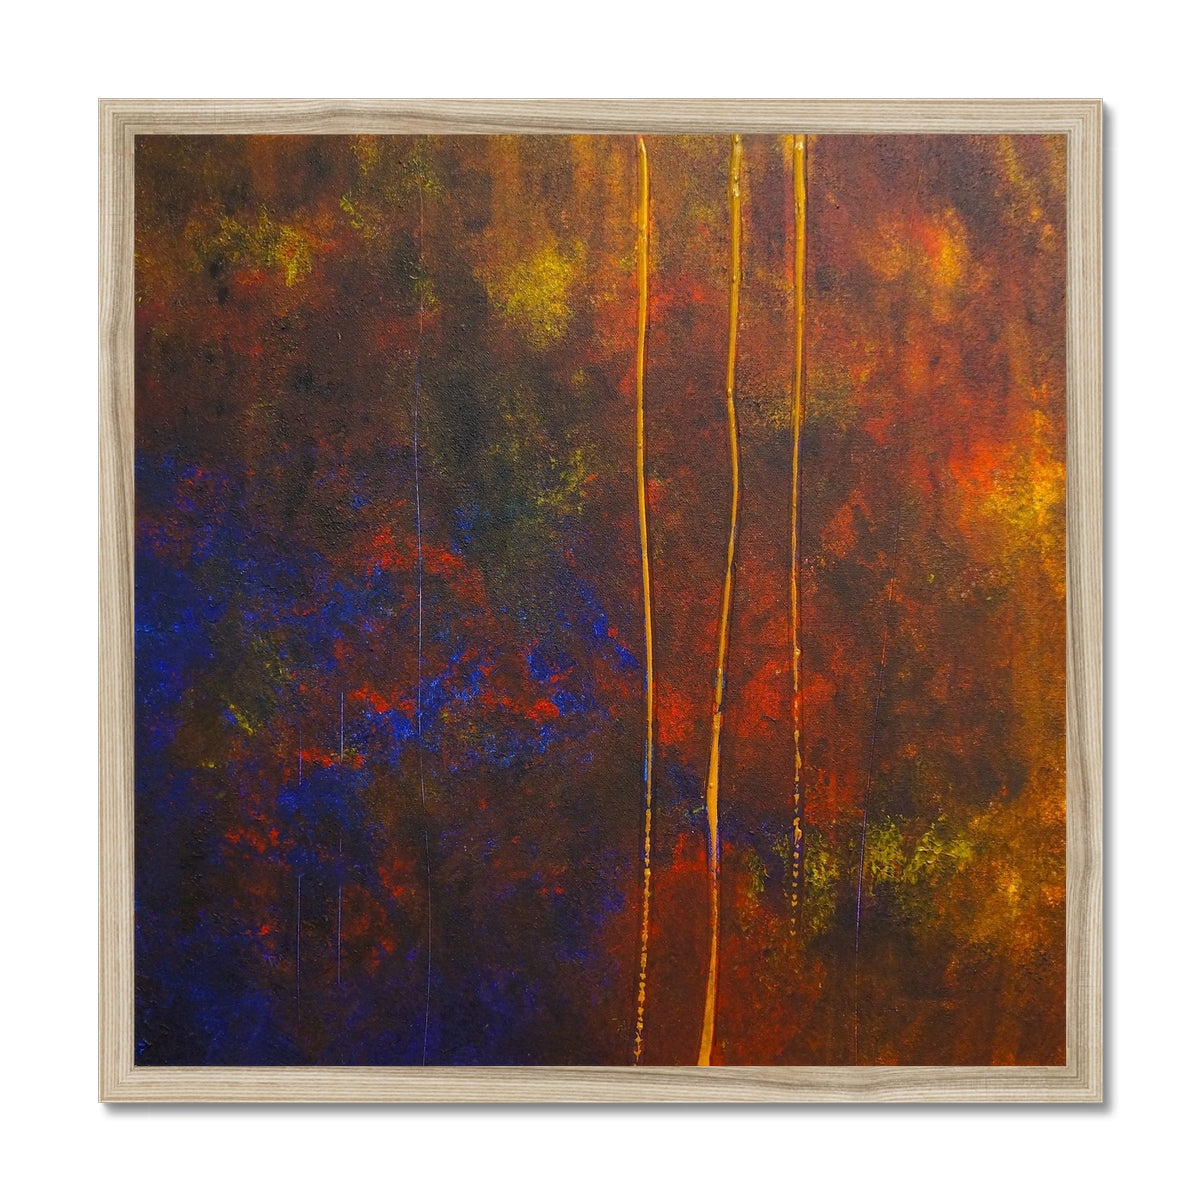 The Autumn Wood Abstract Painting | Framed Prints From Scotland-Framed Prints-Abstract & Impressionistic Art Gallery-20"x20"-Natural Frame-Paintings, Prints, Homeware, Art Gifts From Scotland By Scottish Artist Kevin Hunter